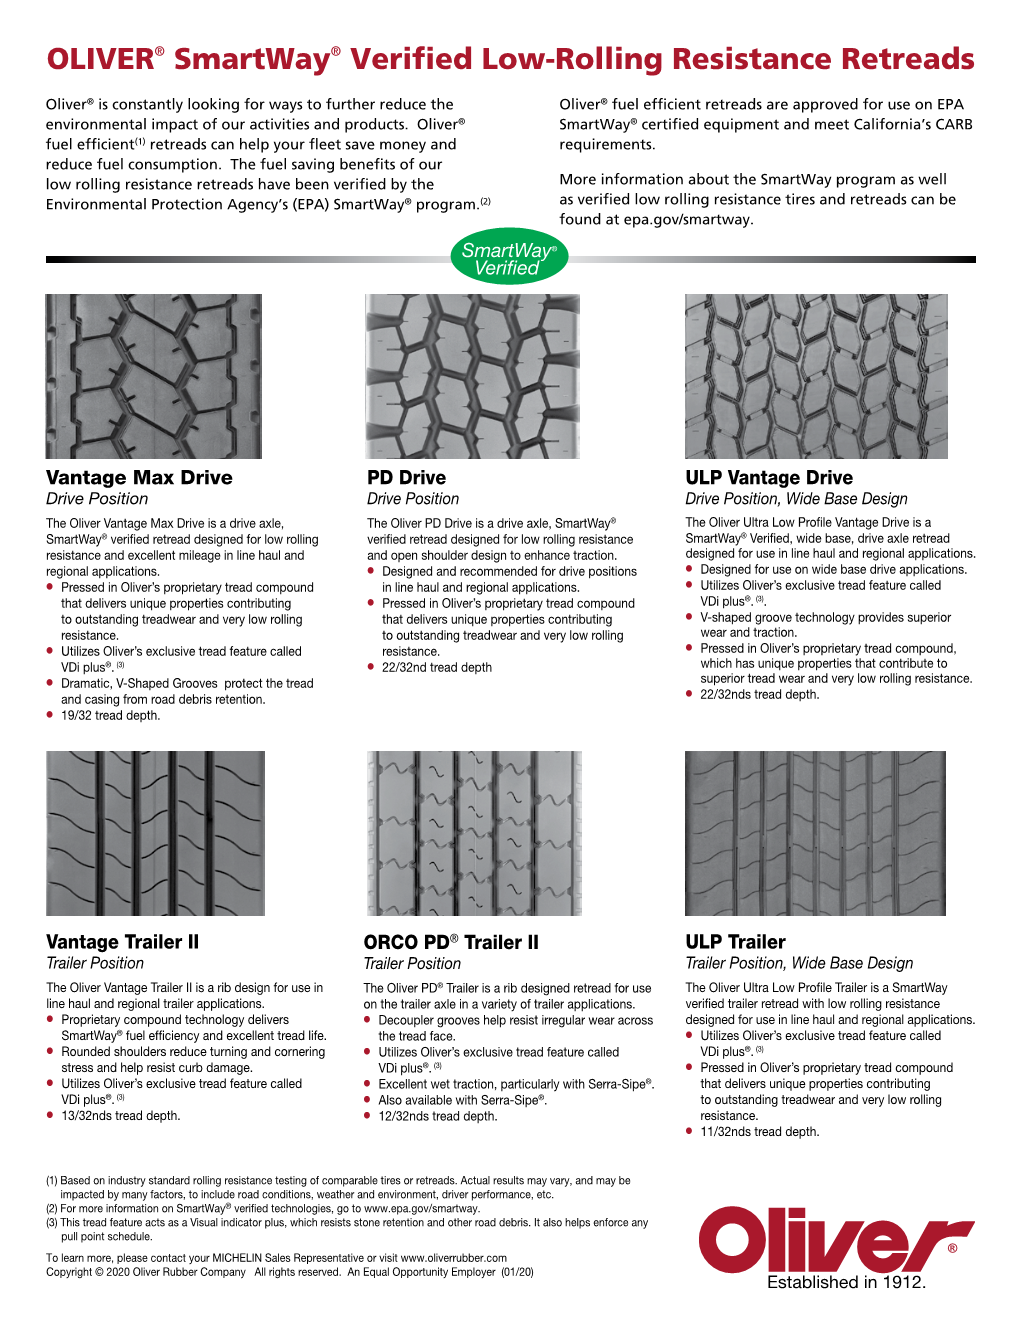 OLIVER® Smartway® Verified Low-Rolling Resistance Retreads